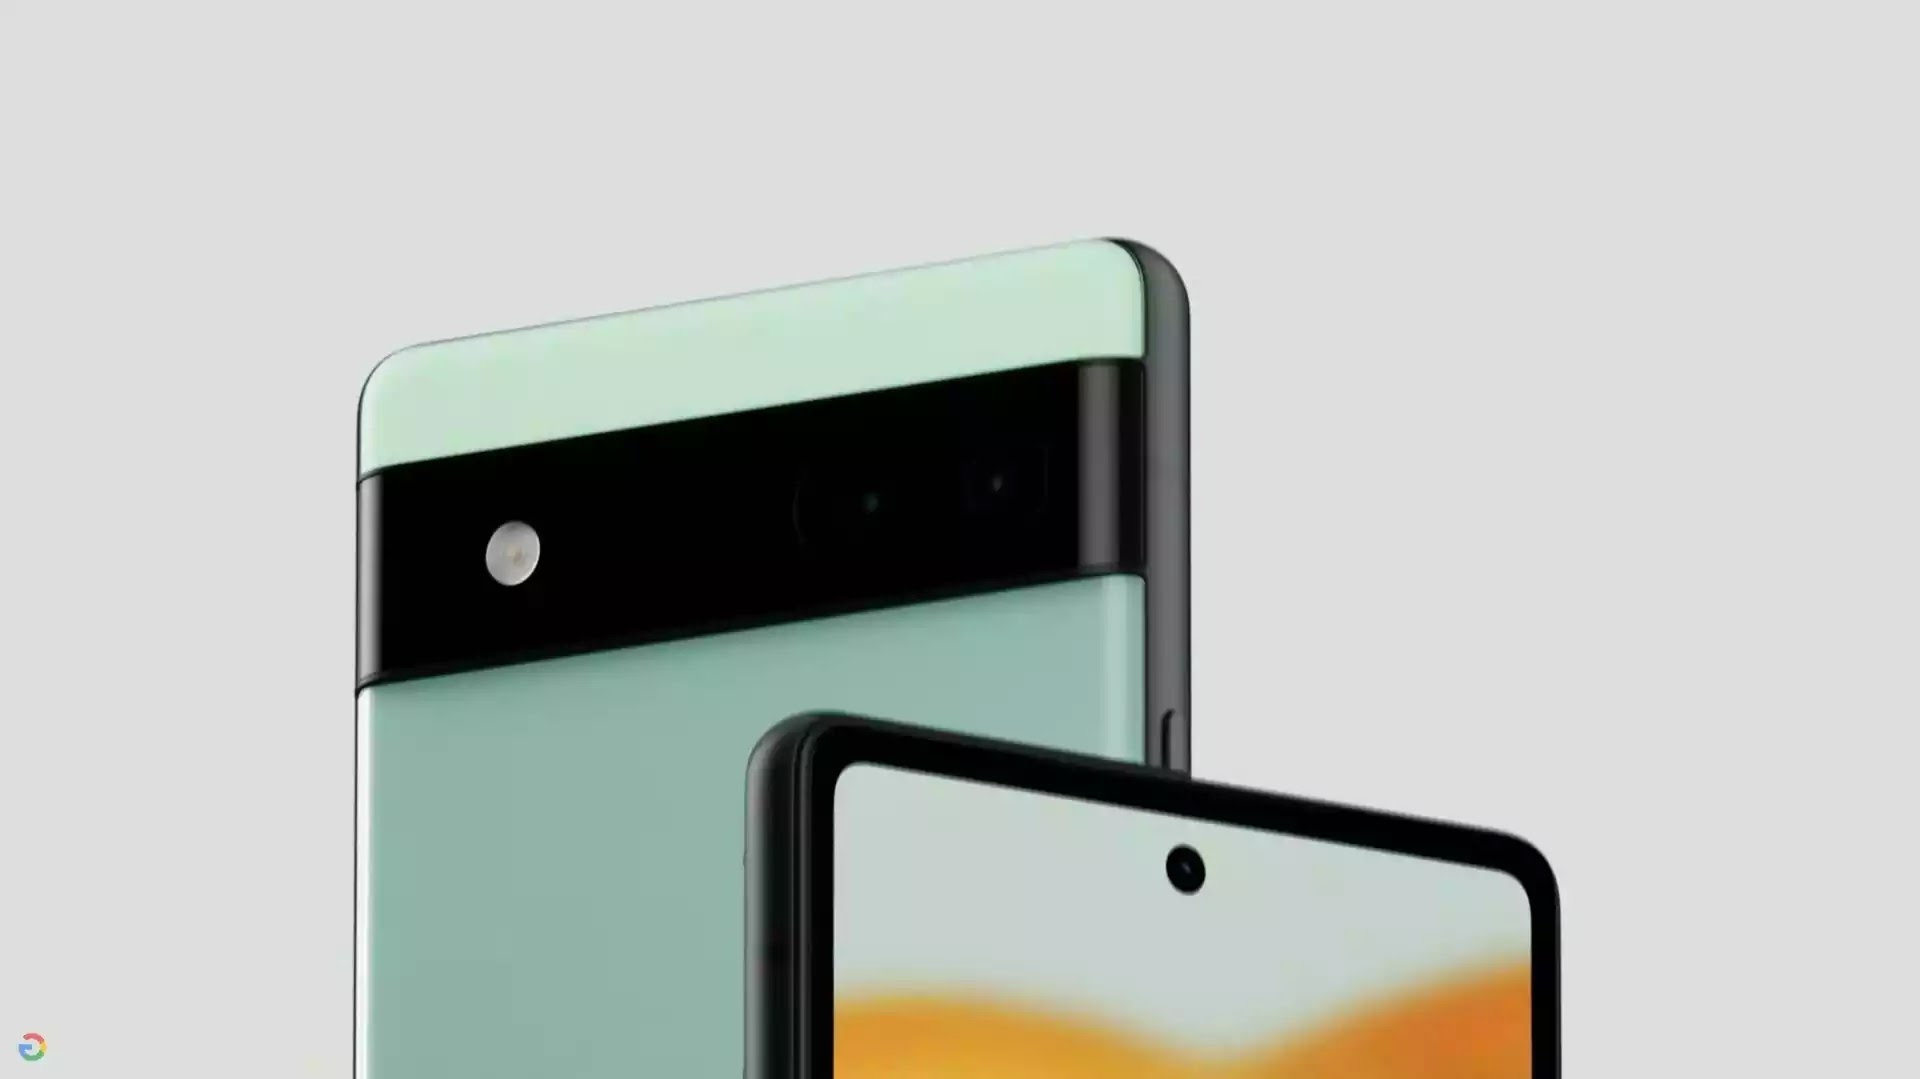 Google Pixel 6A Specs features and price of the new Google Pixel